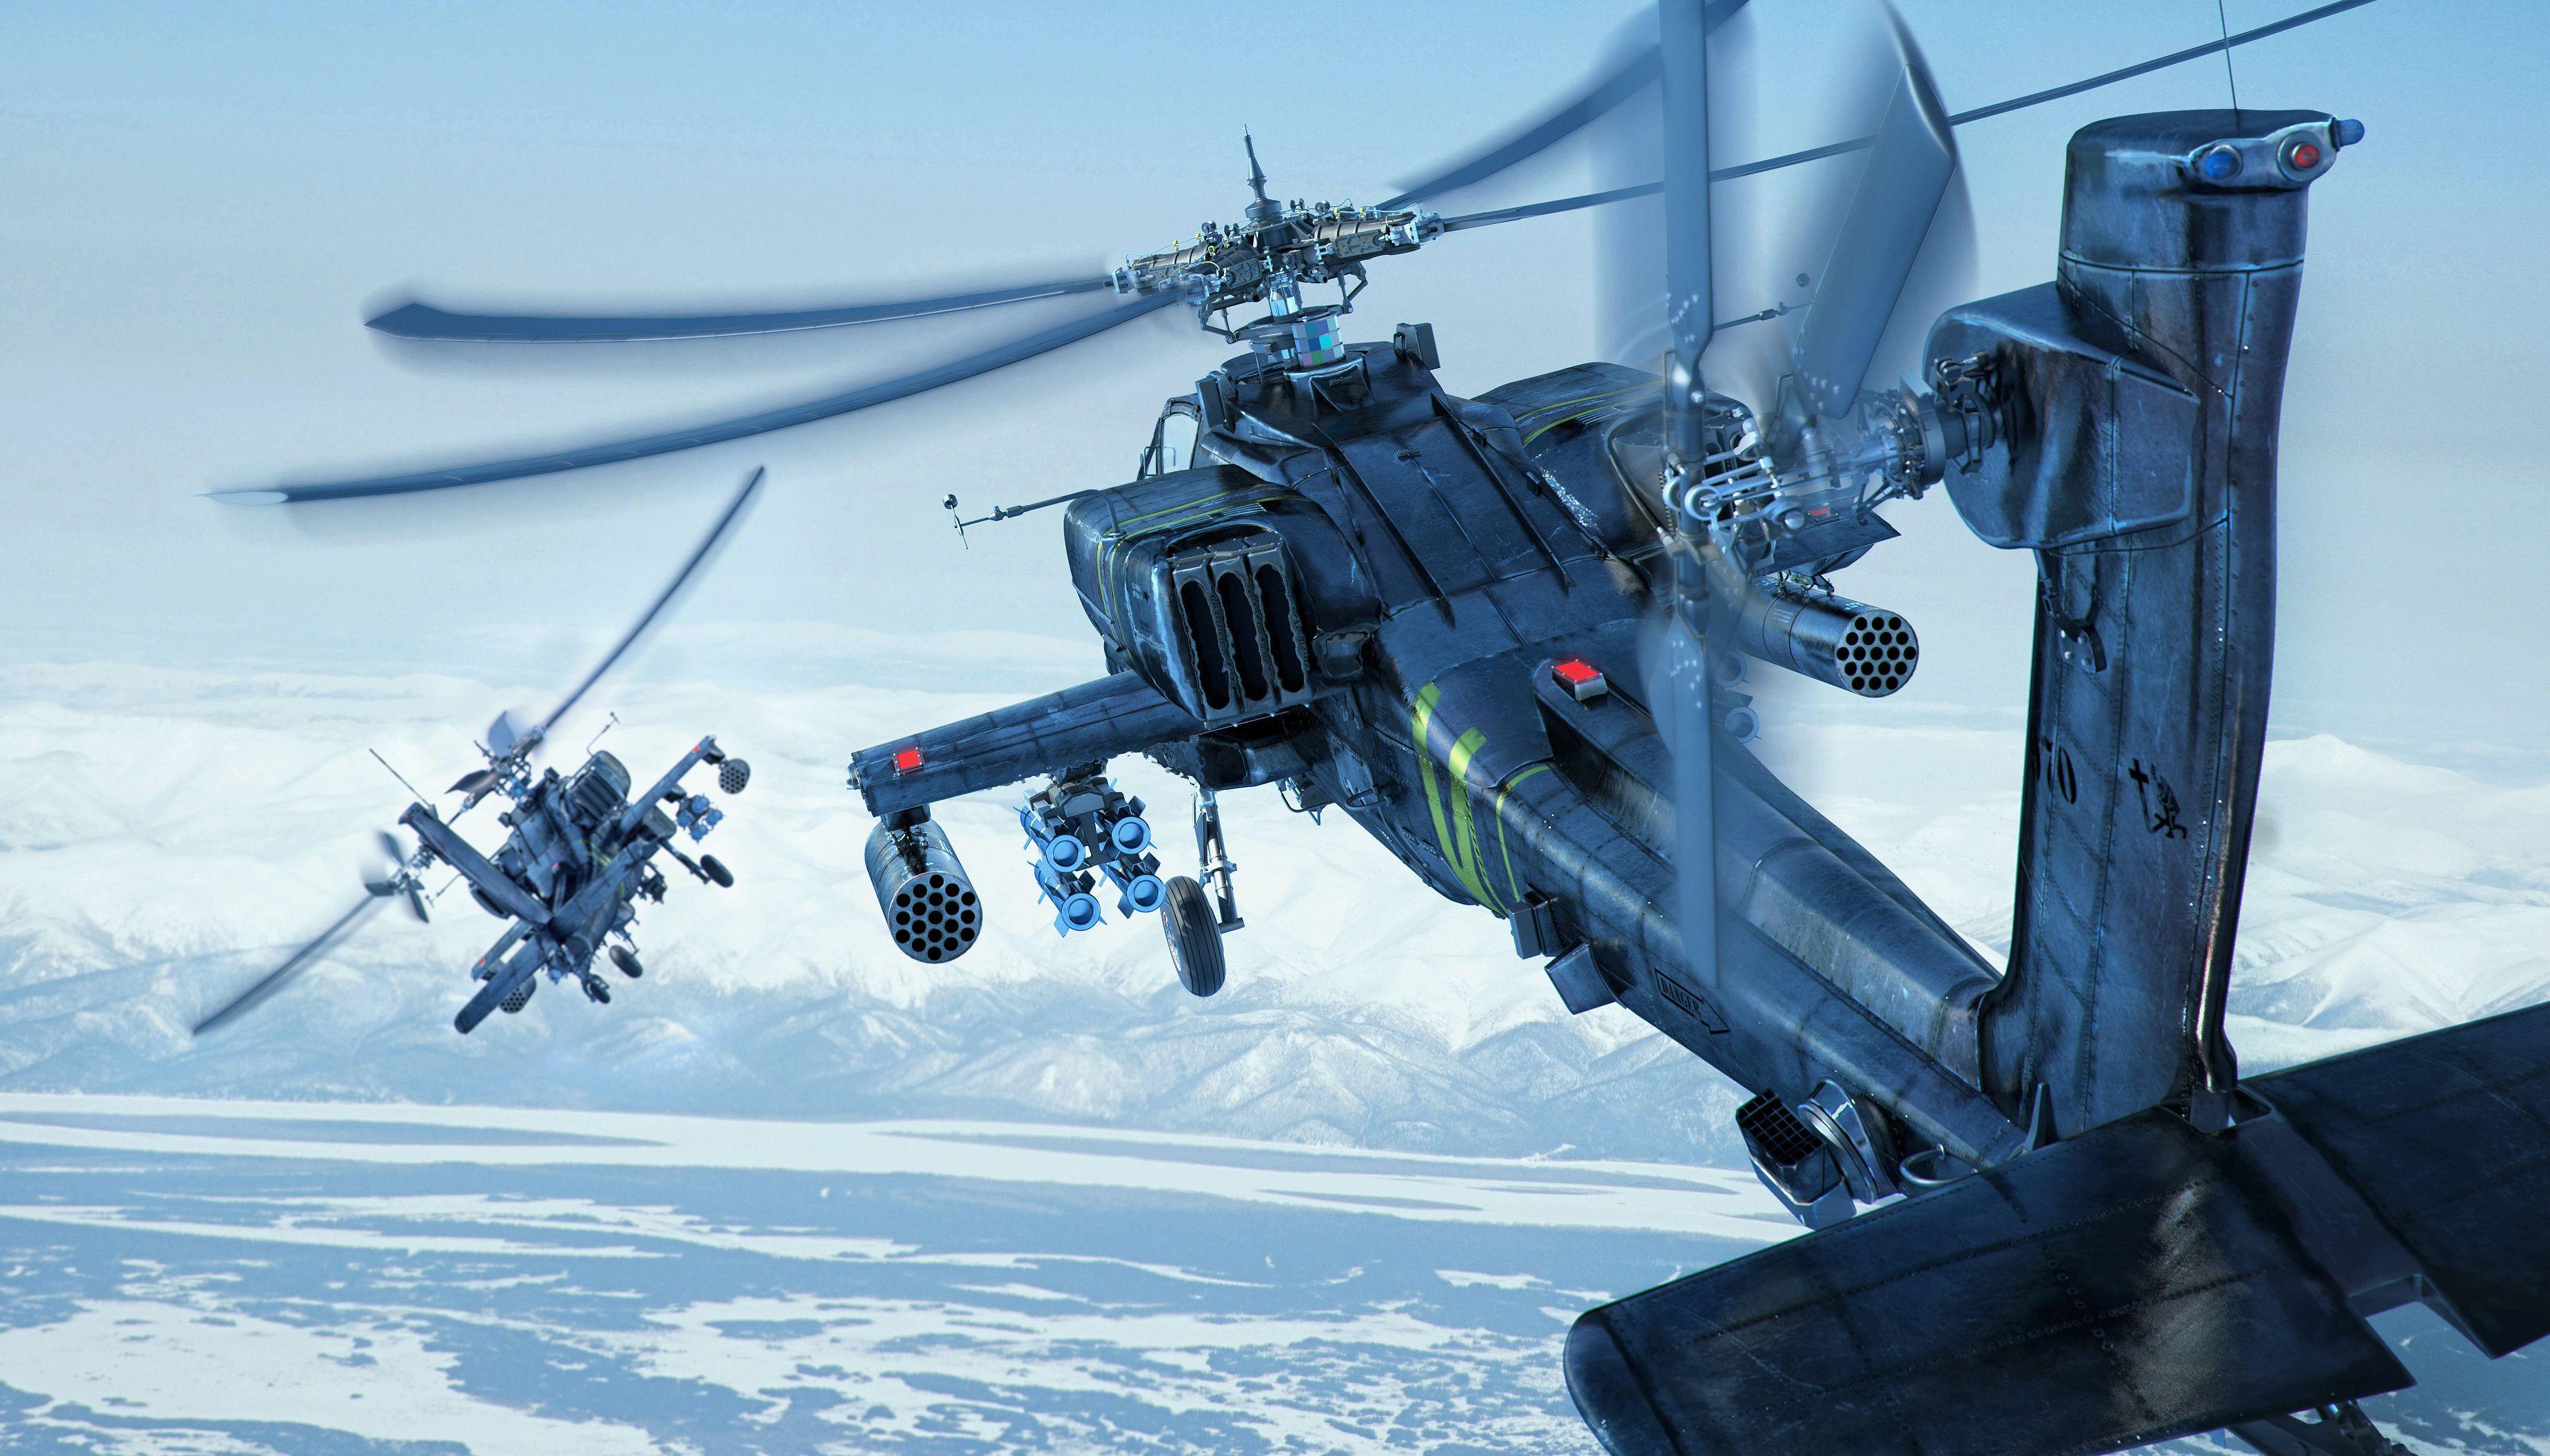 Apache Helicopter Wallpapers Desktop